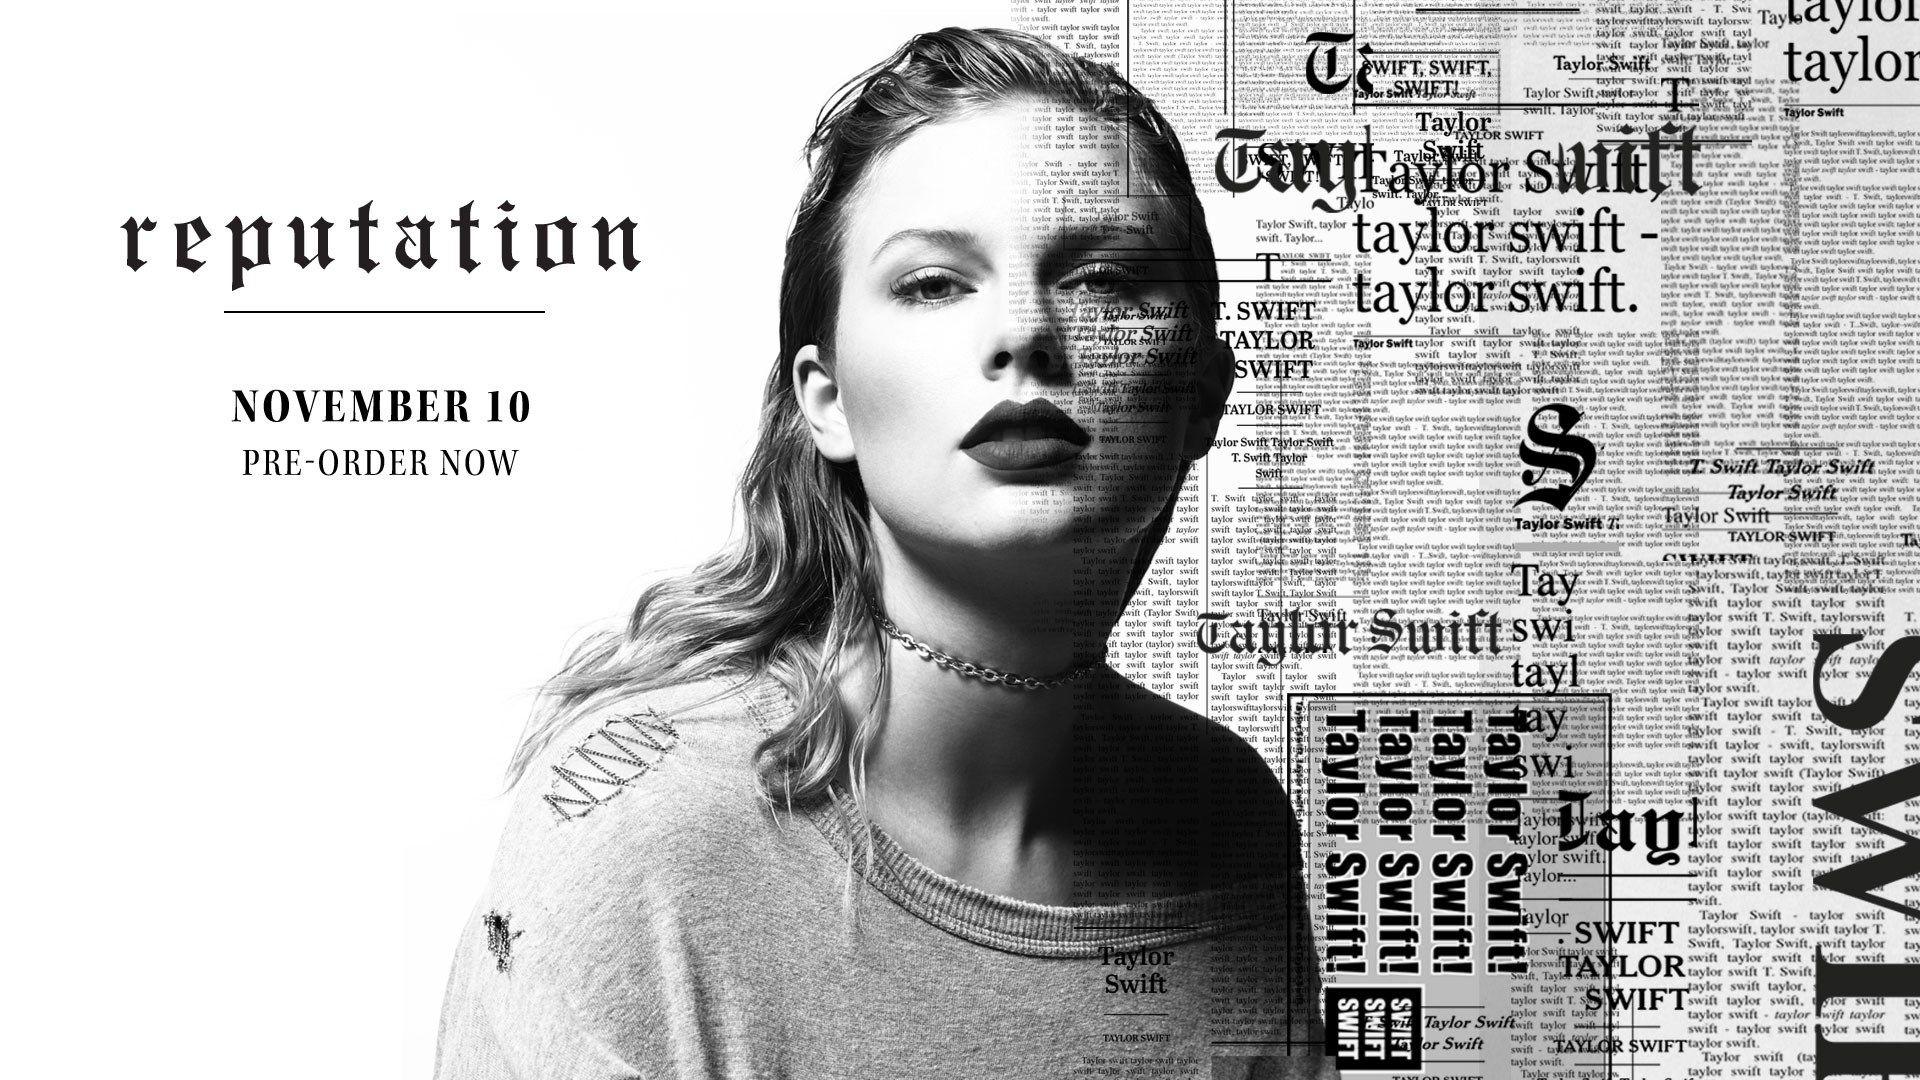 Taylor Swift Just Revealed Her New Album—And We've Got Never